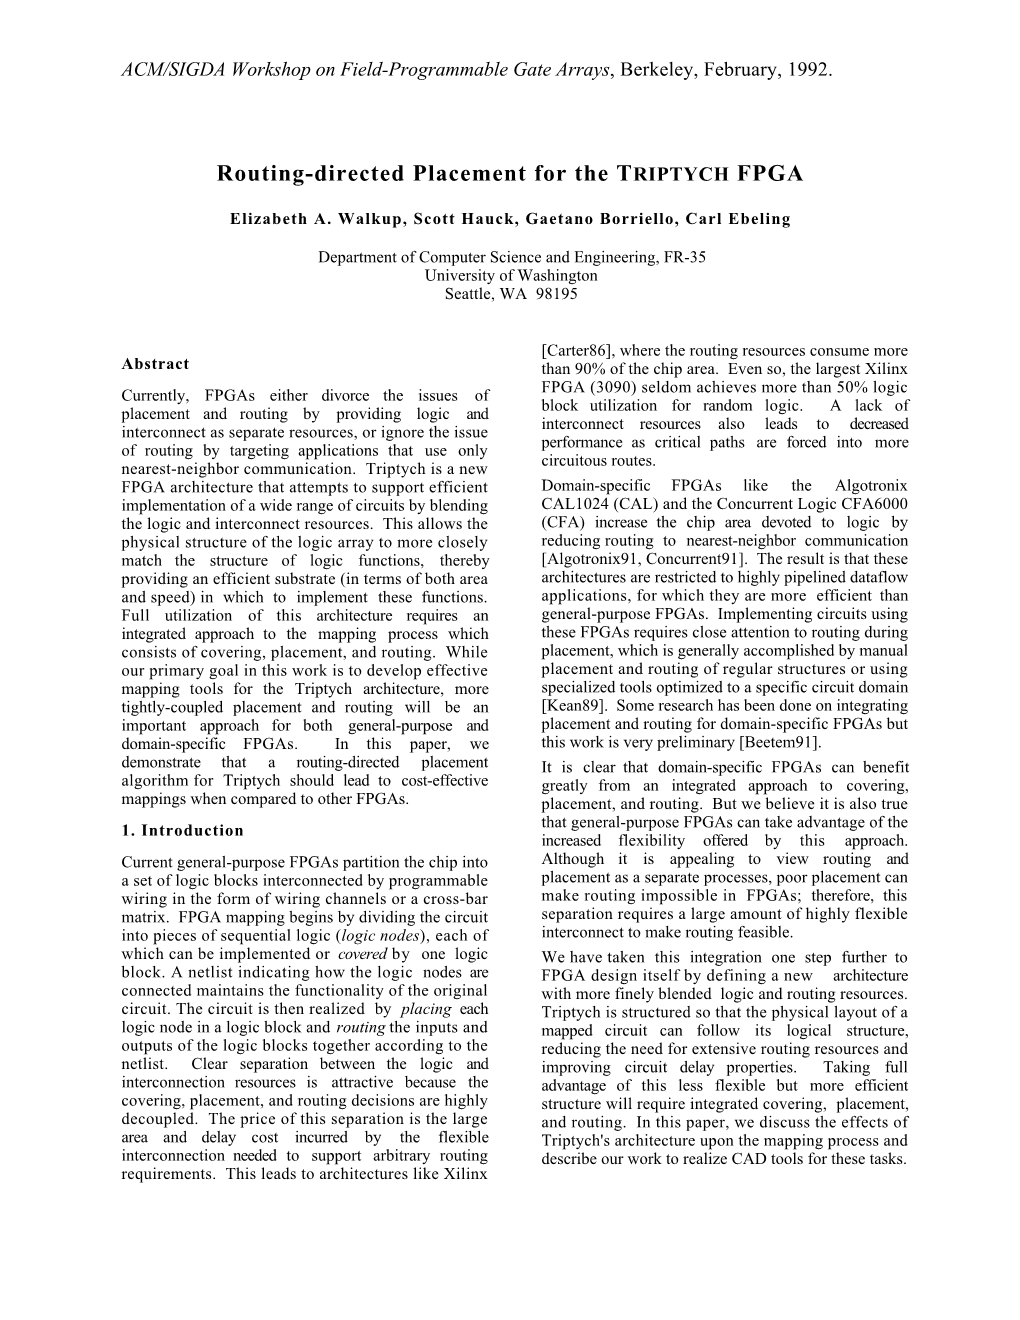 "Routing-Directed Placement for the Triptych FPGA" (PDF)